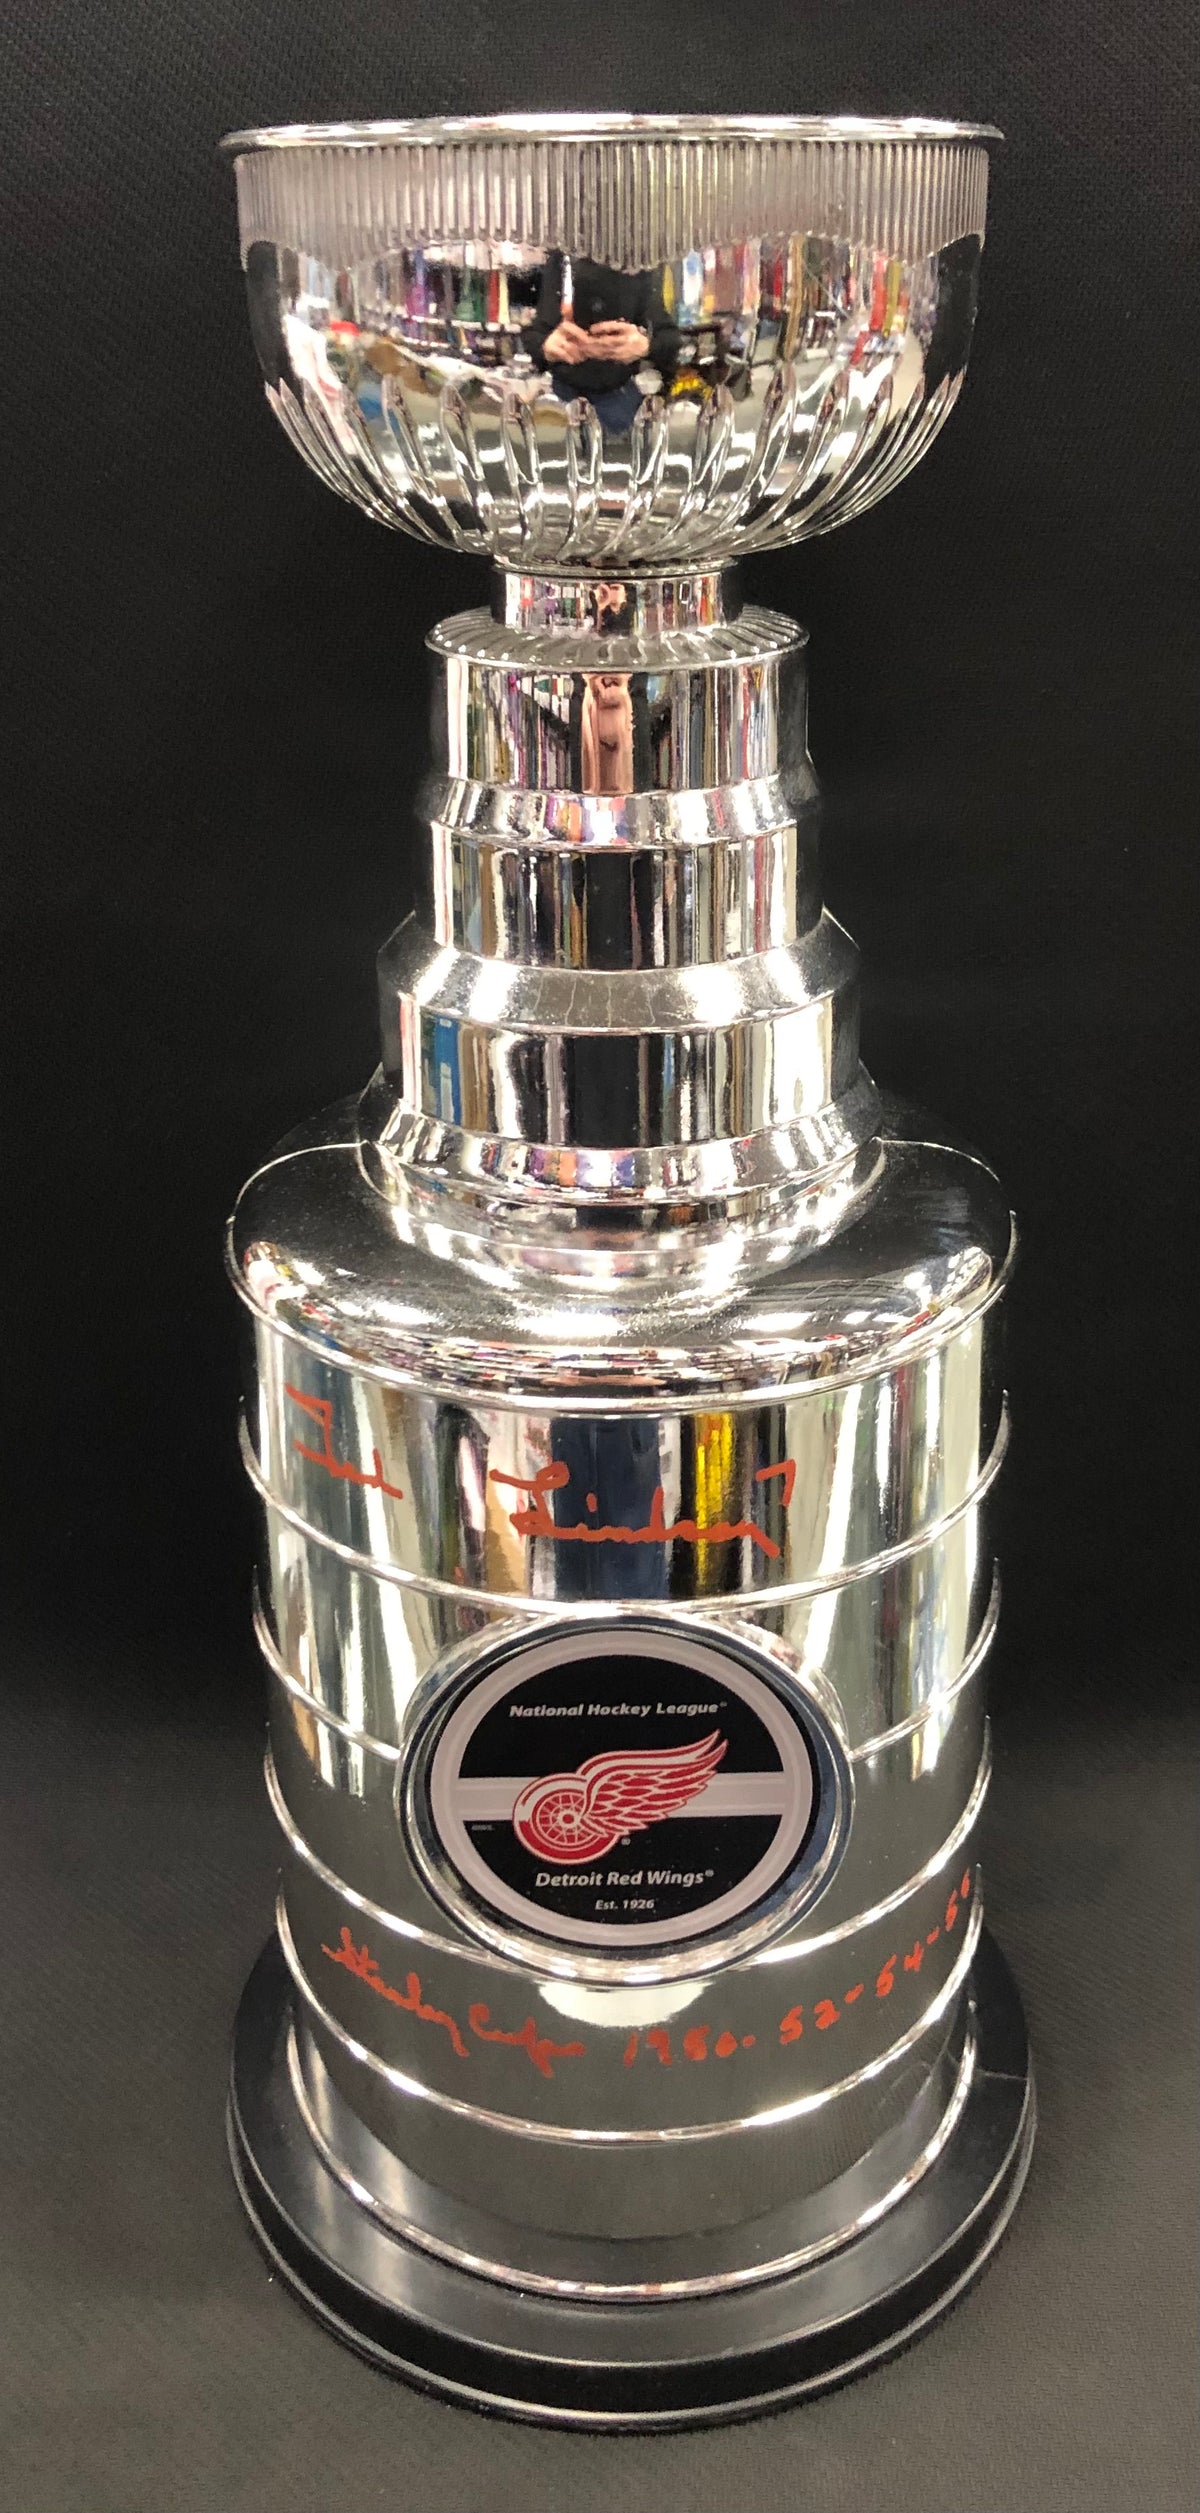 Mini Stanley Cup 